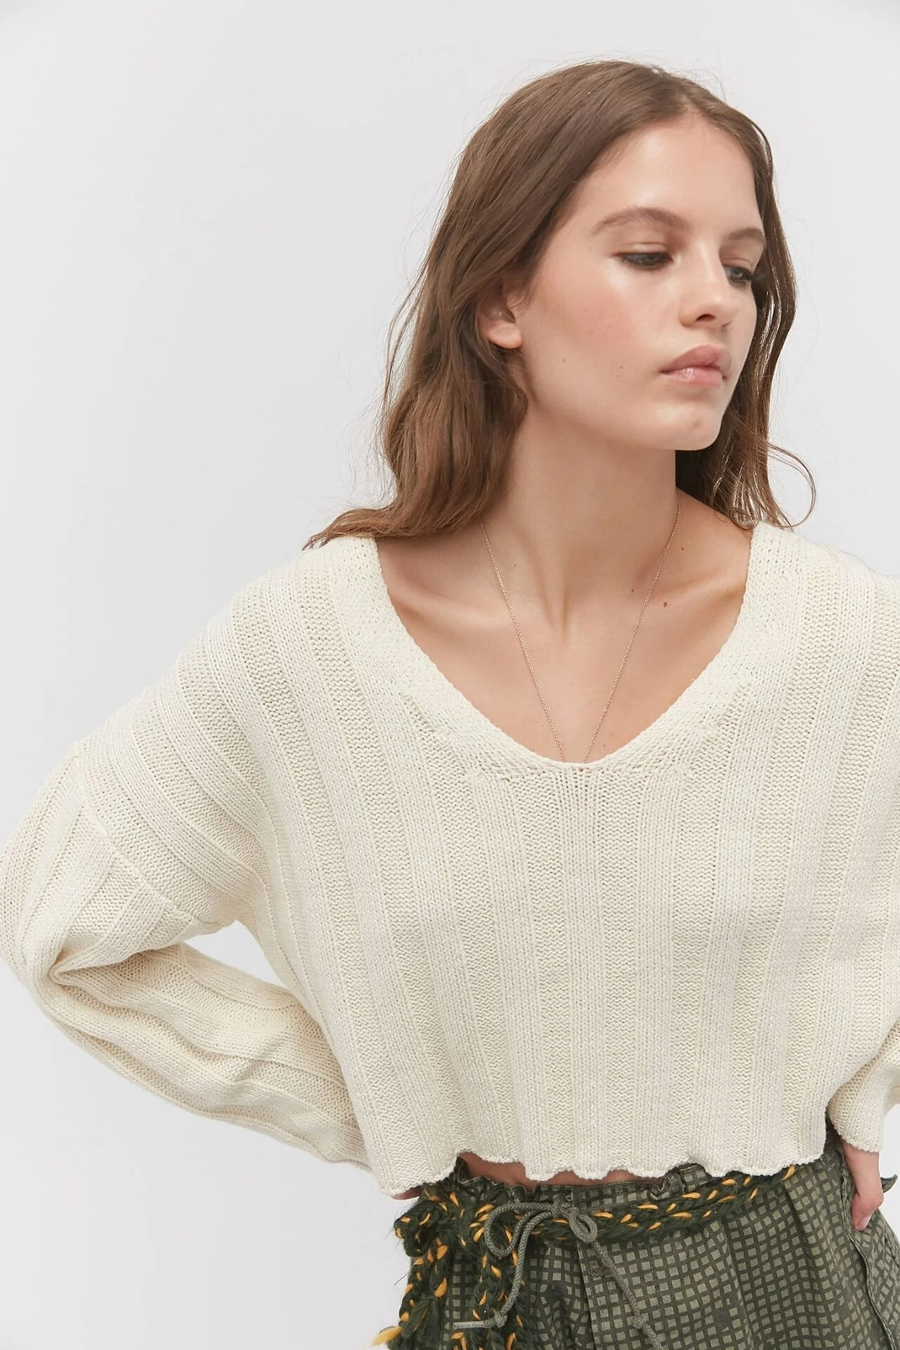 Fashion White V-neck Knitted Top,Sweater